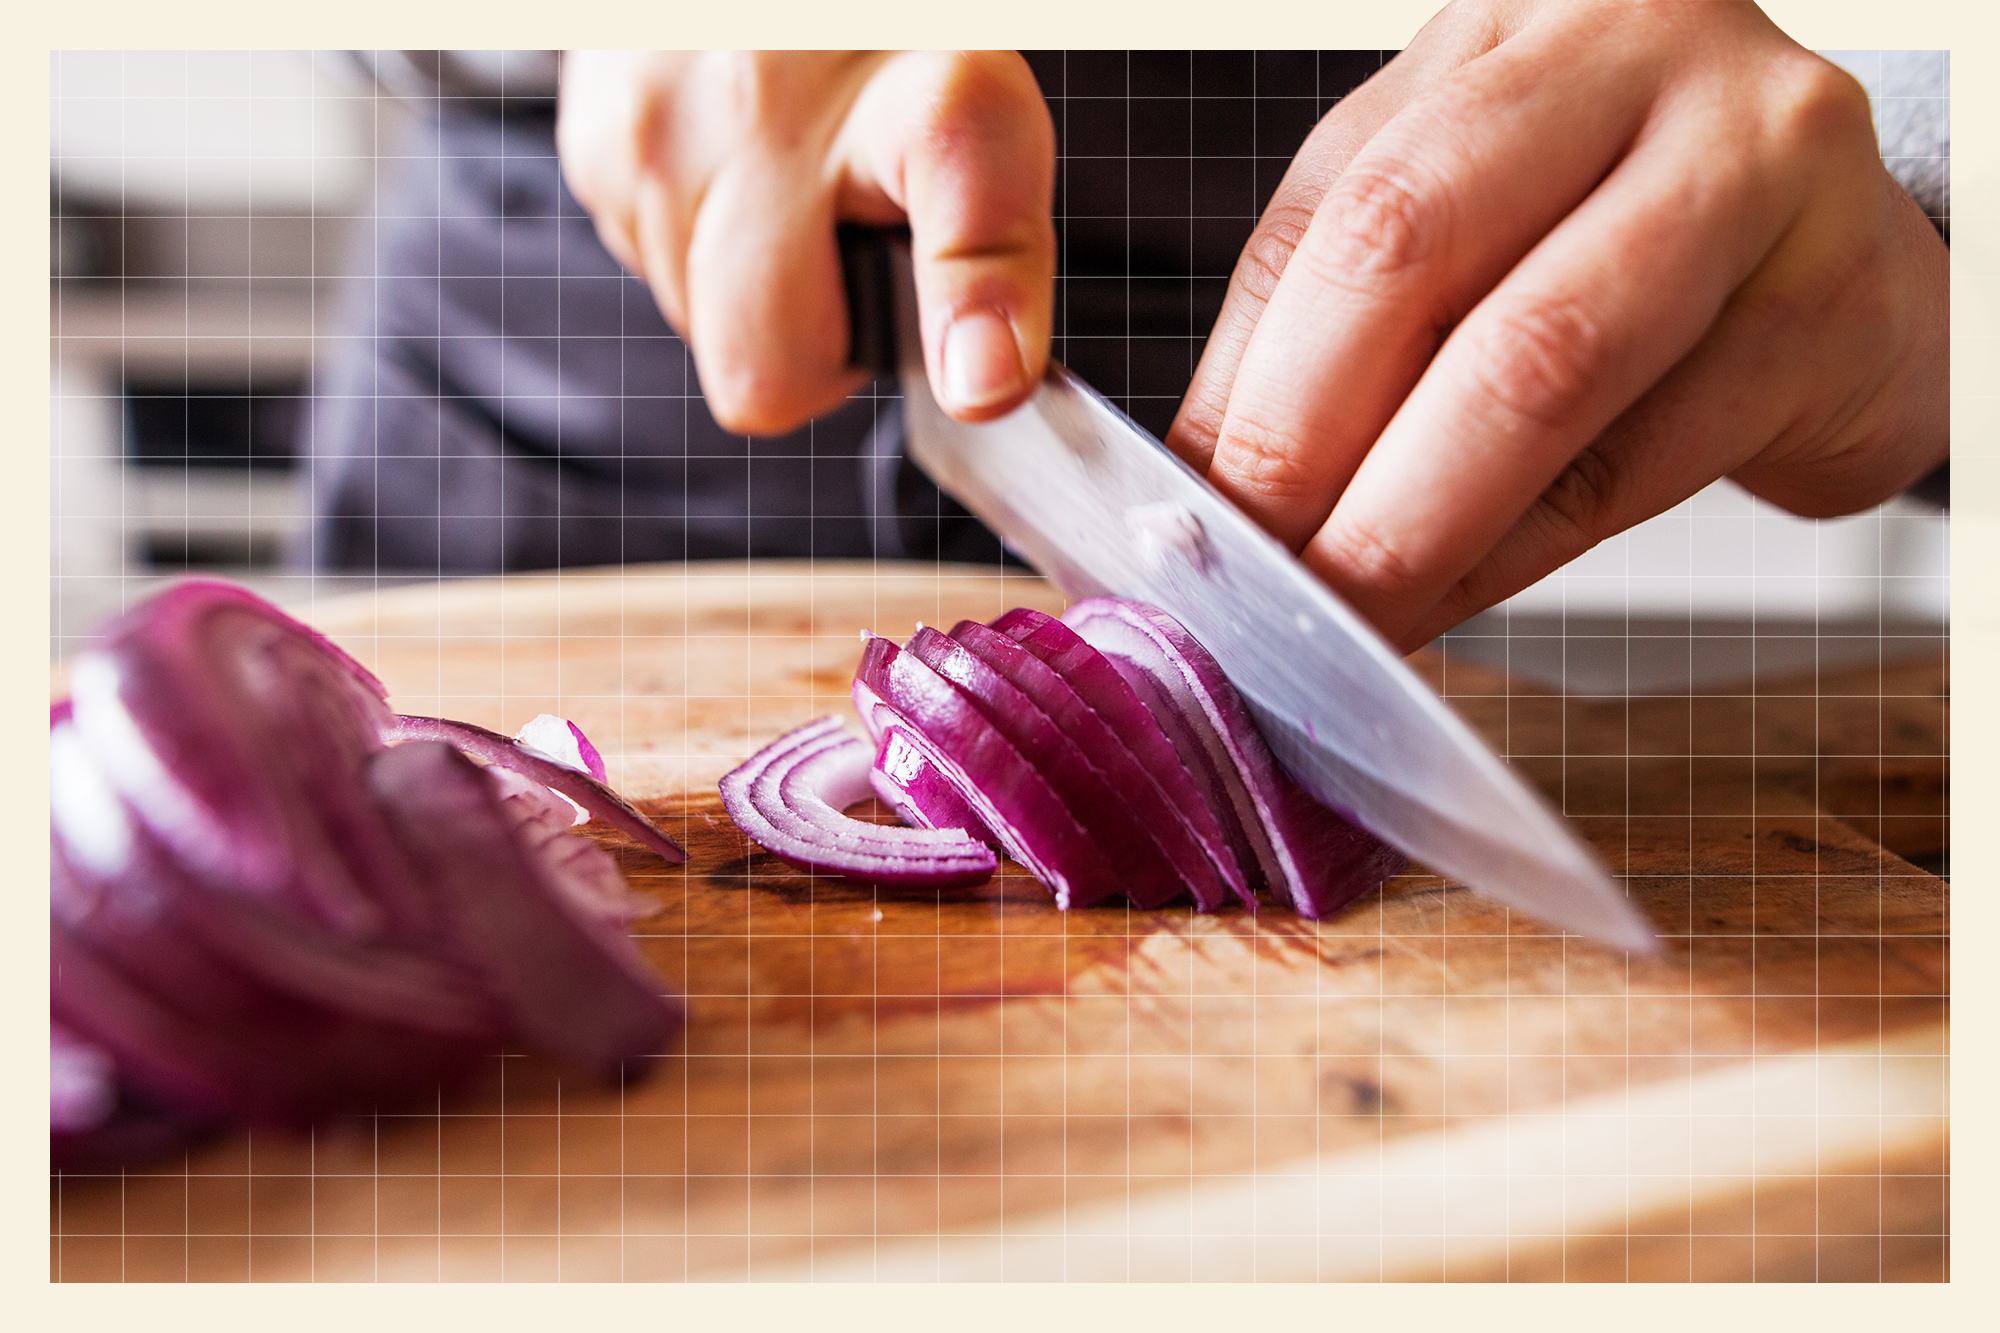 what is the best way to cut onions without crying and what chemical causes the tears